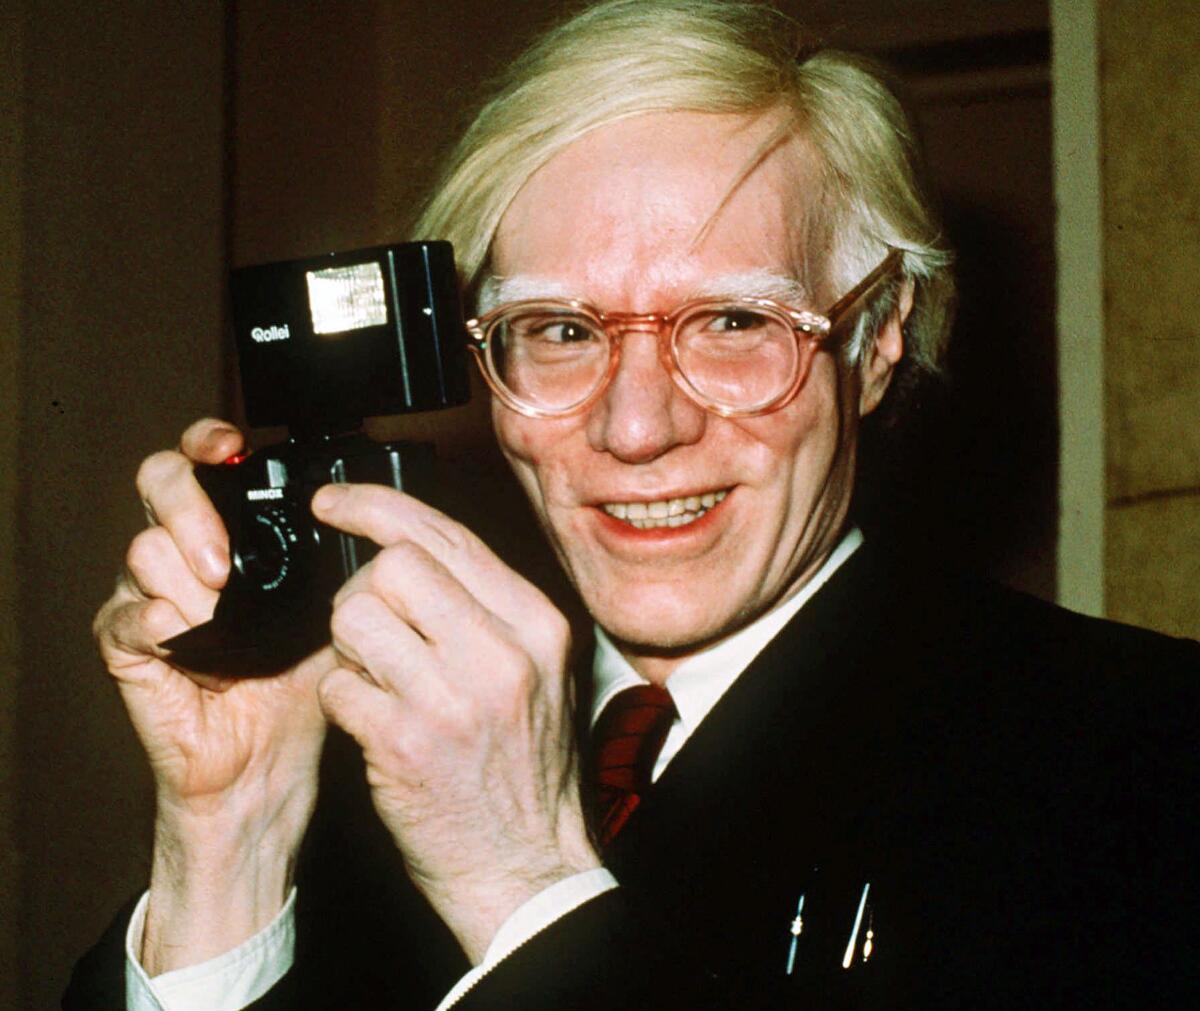 Andy Warhol smiling and holding a camera